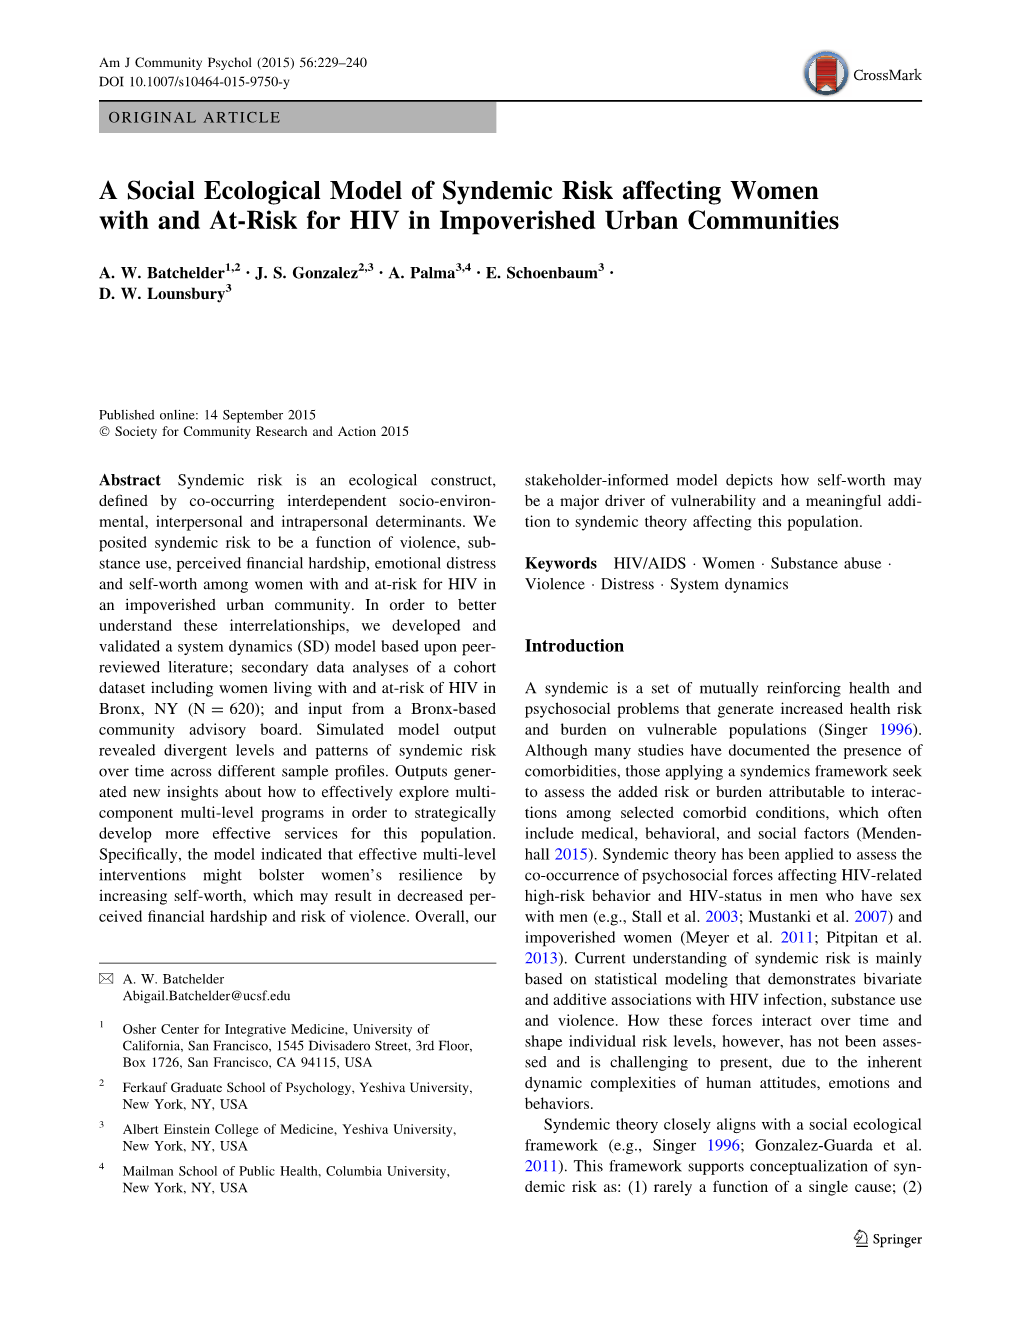 A Social Ecological Model of Syndemic Risk Affecting Women with and At-Risk for HIV in Impoverished Urban Communities